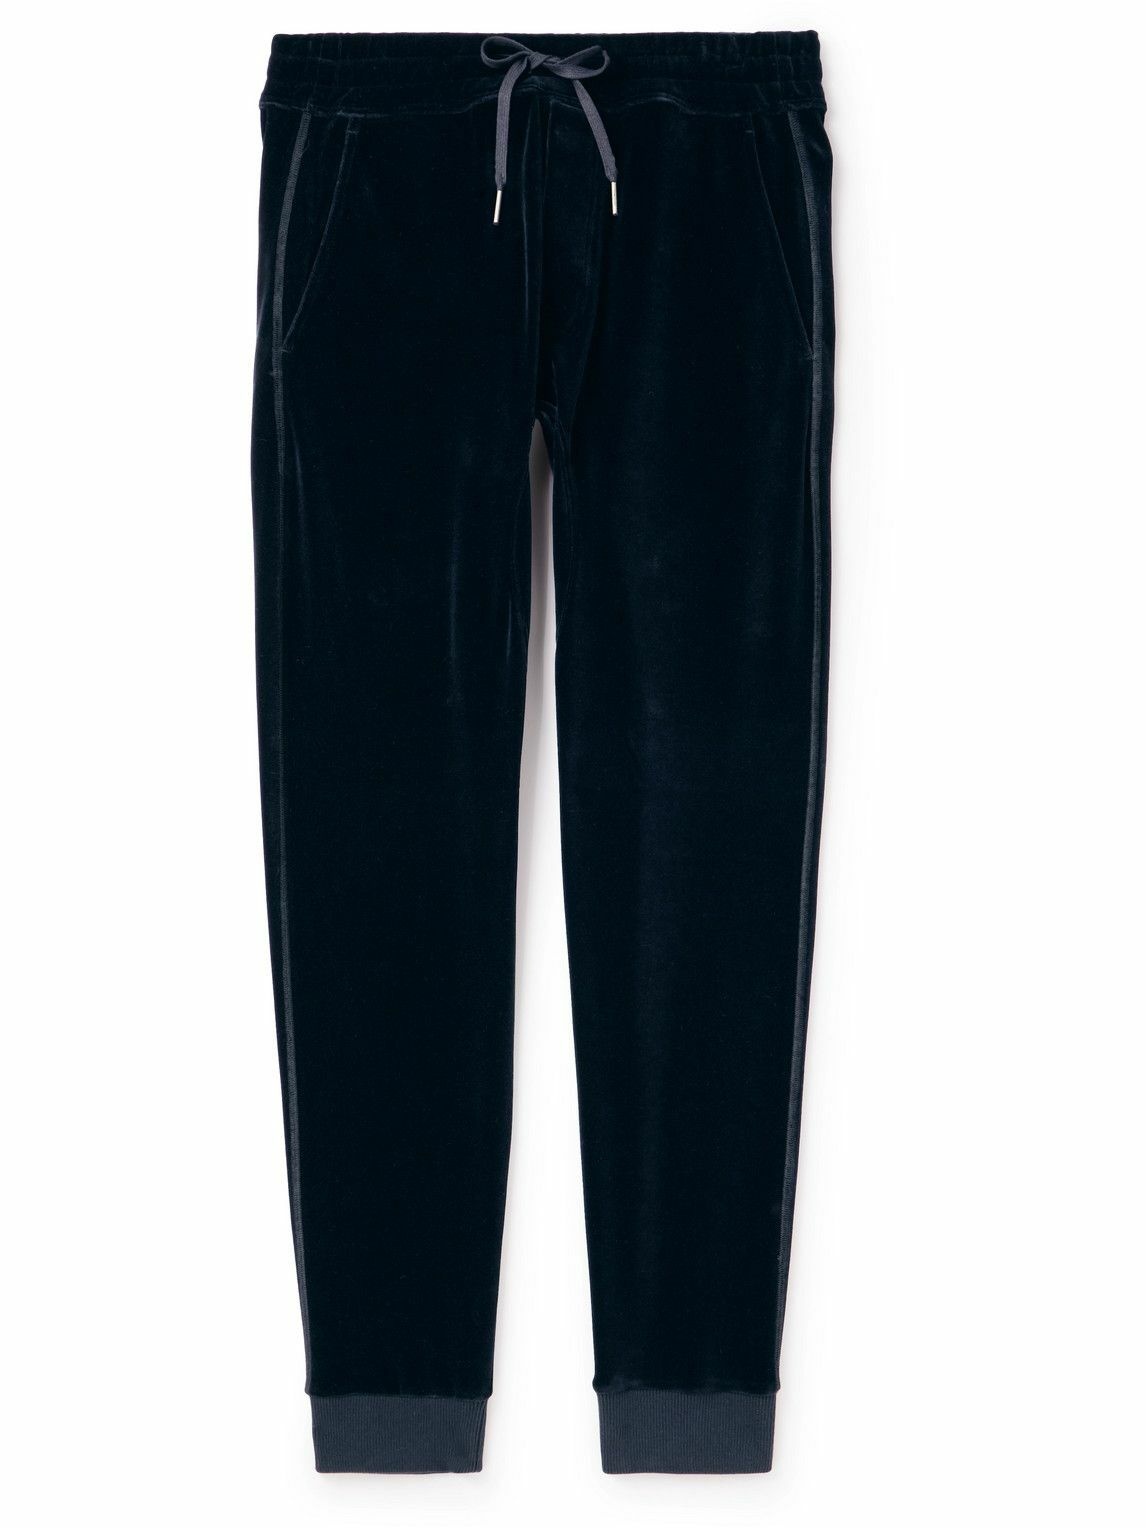 TOM FORD - Tapered Cotton-Blend Velour Sweatpants - Blue TOM FORD